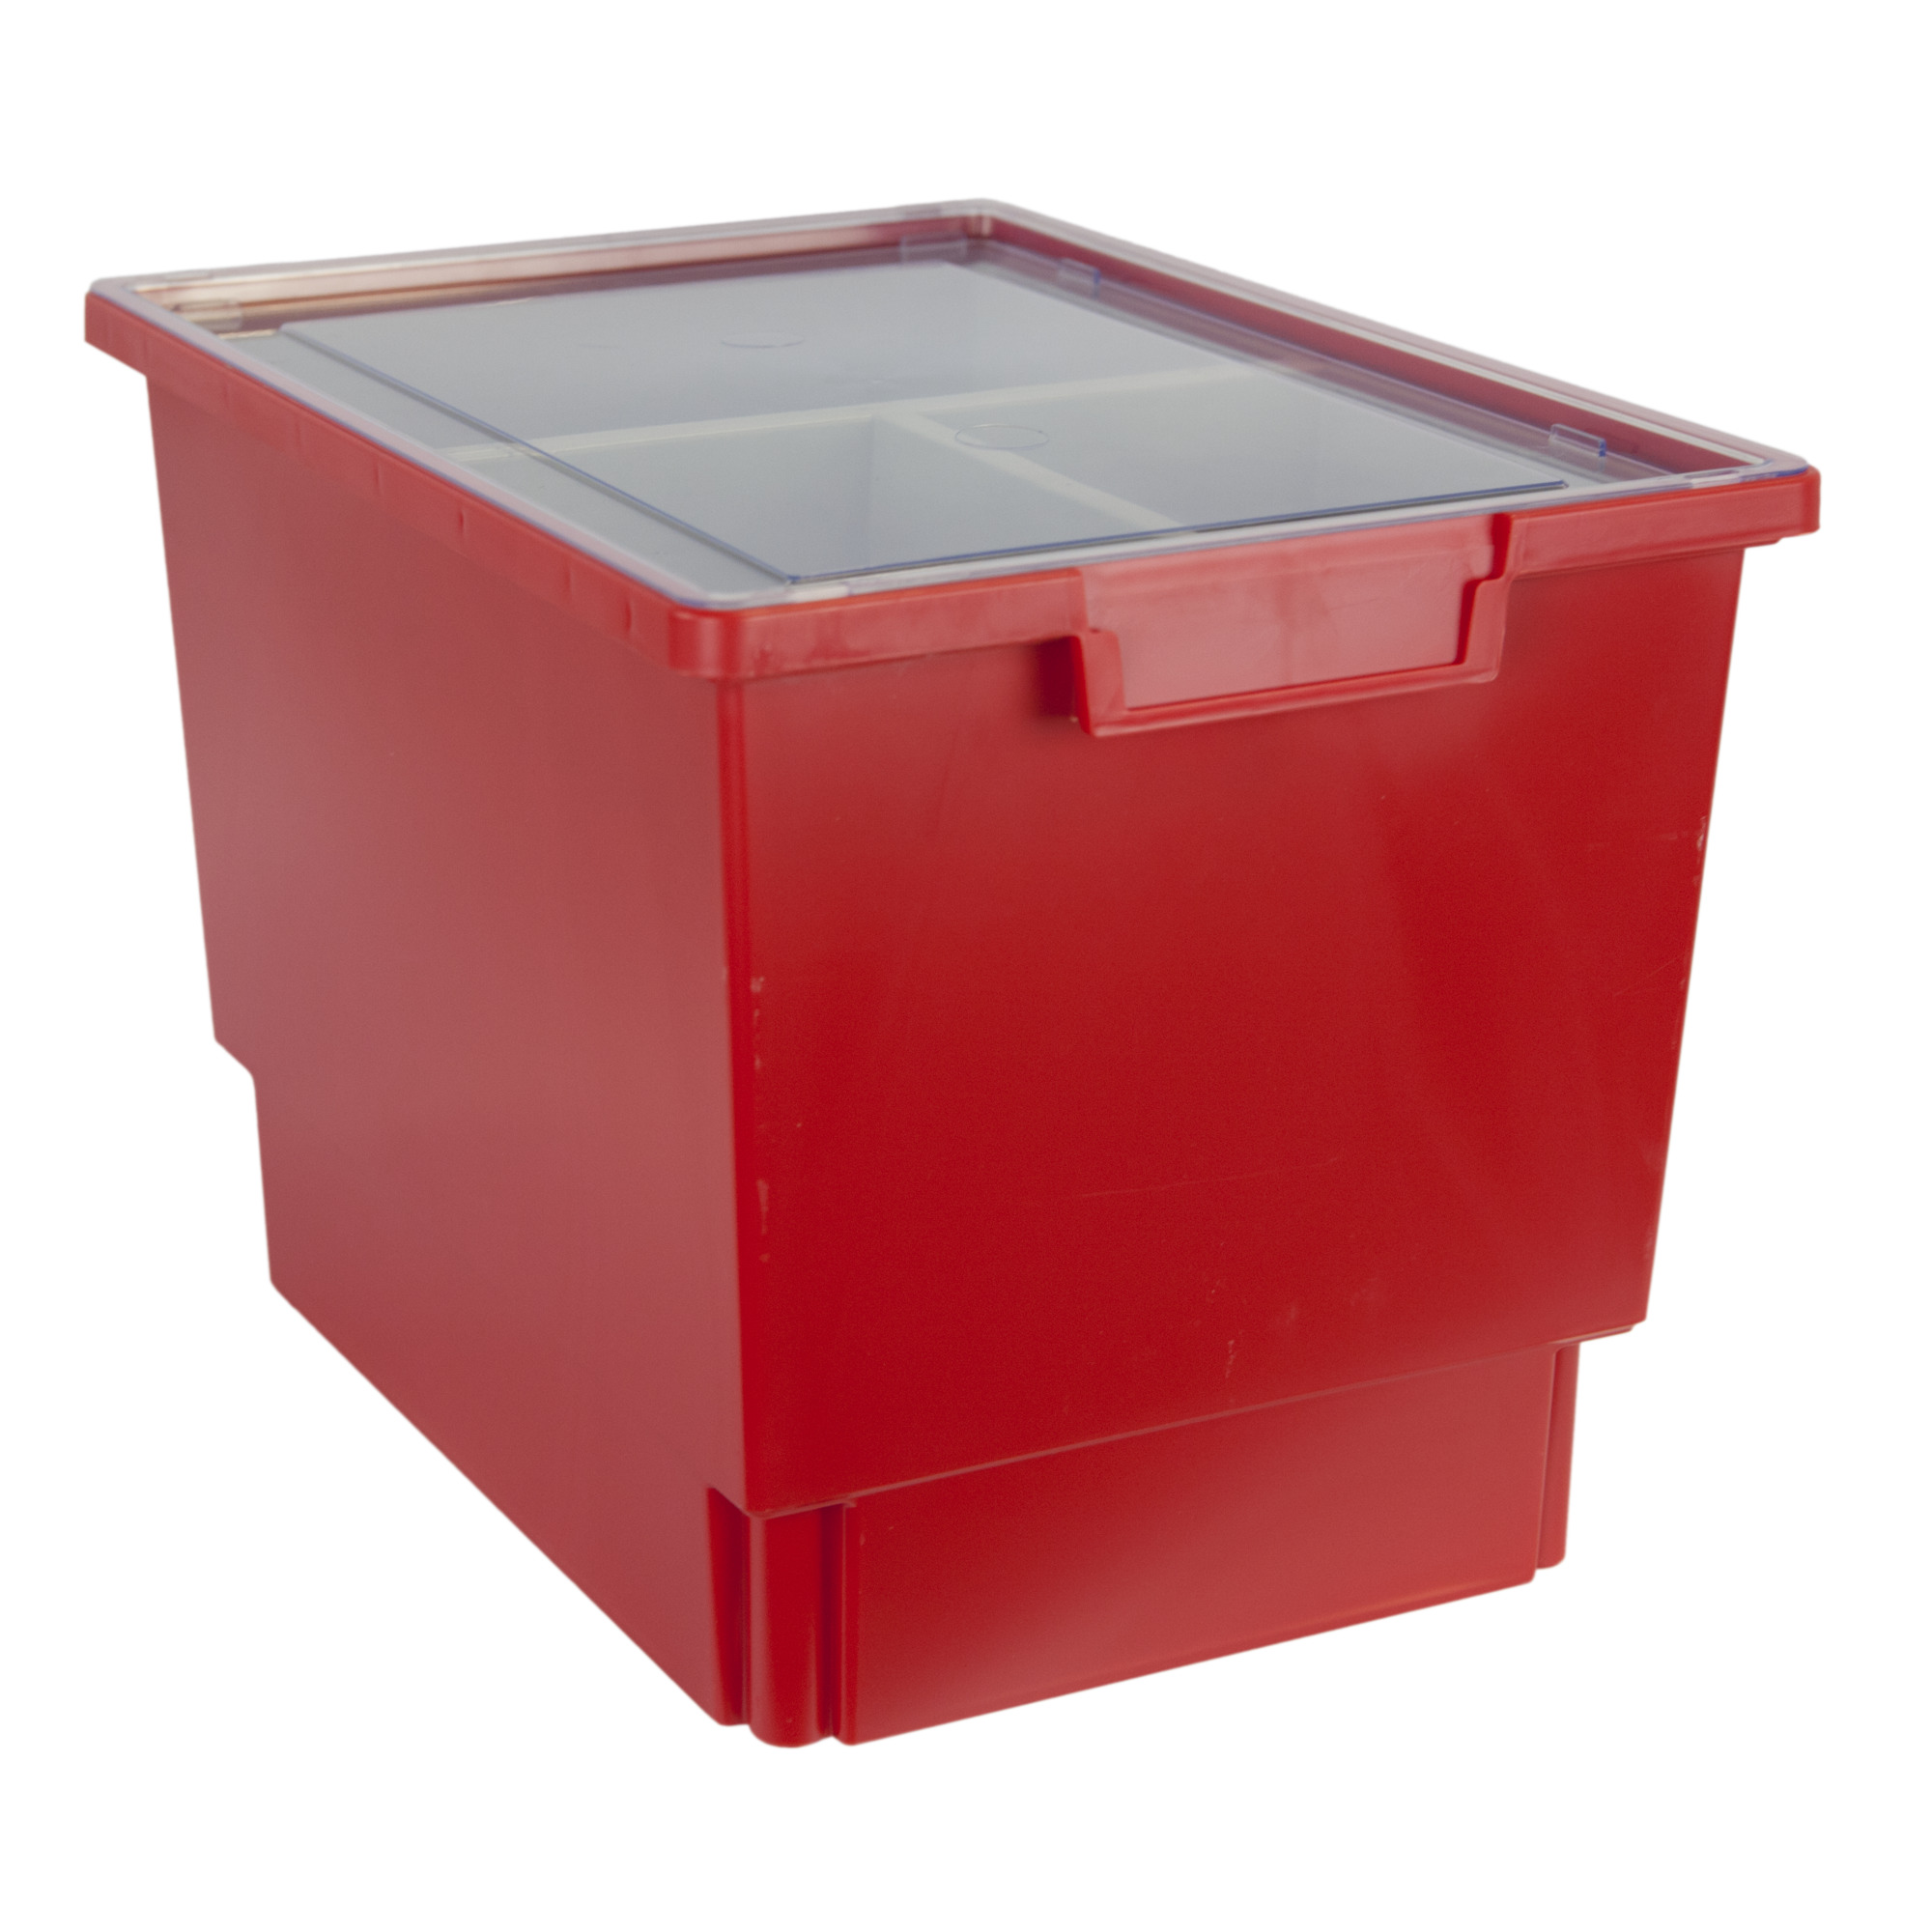 Certwood StorWerks, Slim Line 12Inch Tray Kit (3 x Inserts) Red, Included (qty.) 1, Material Plastic, Height 12 in, Model CE1954PR-NK0004-1